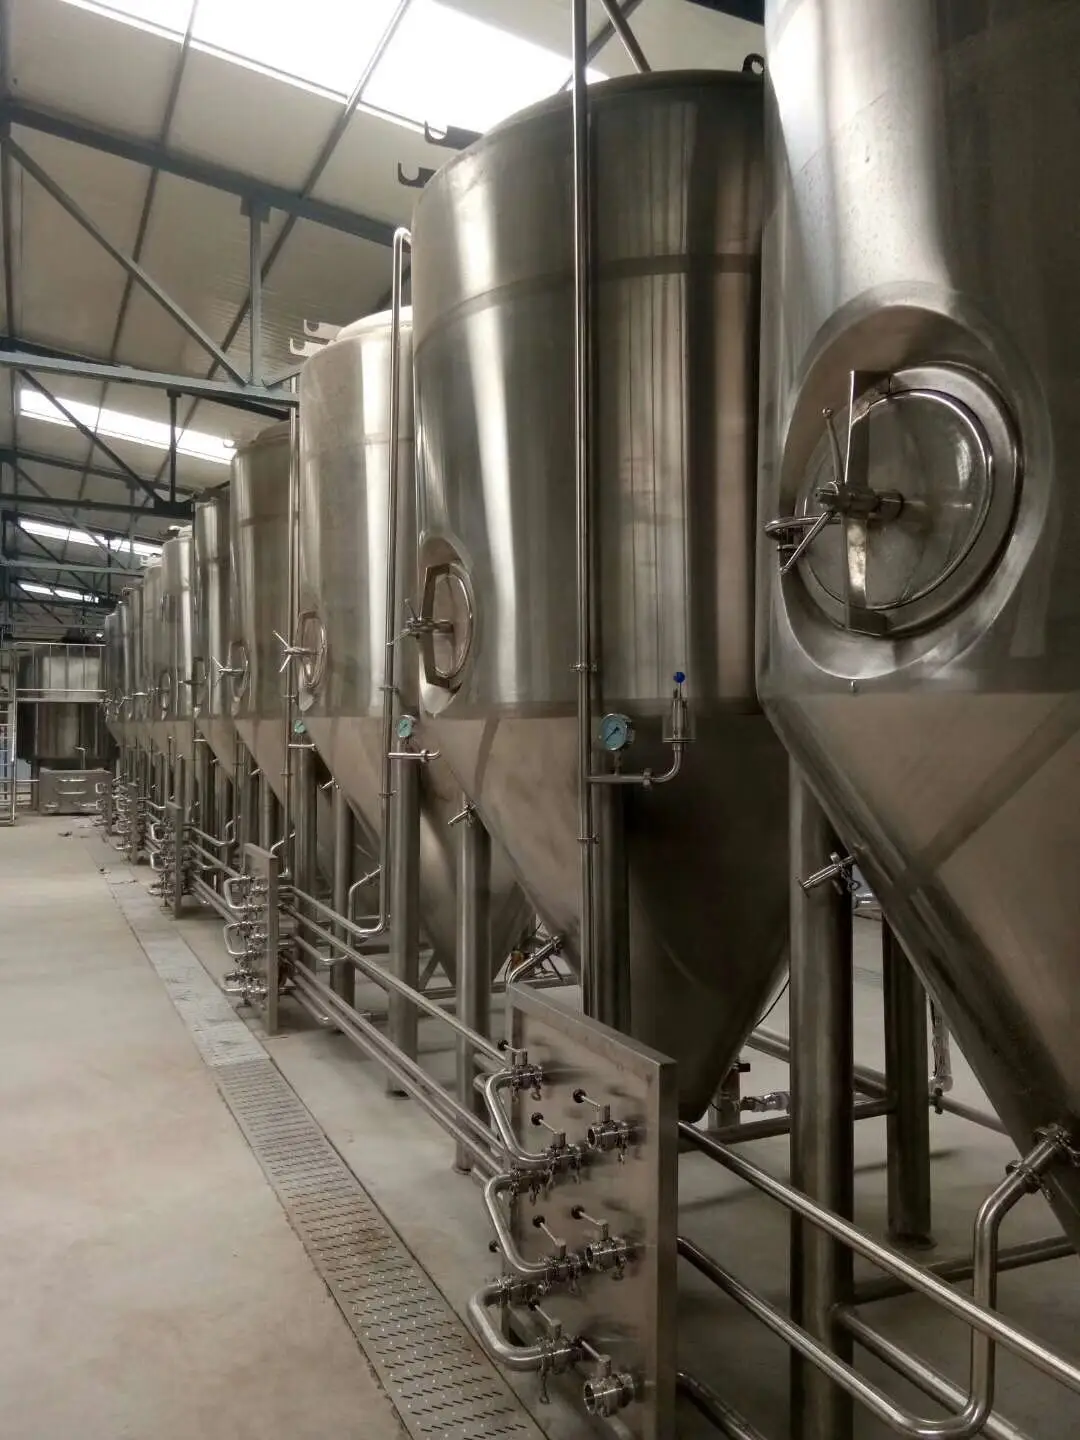 1000L-2000L large and micro beer brewery equipment